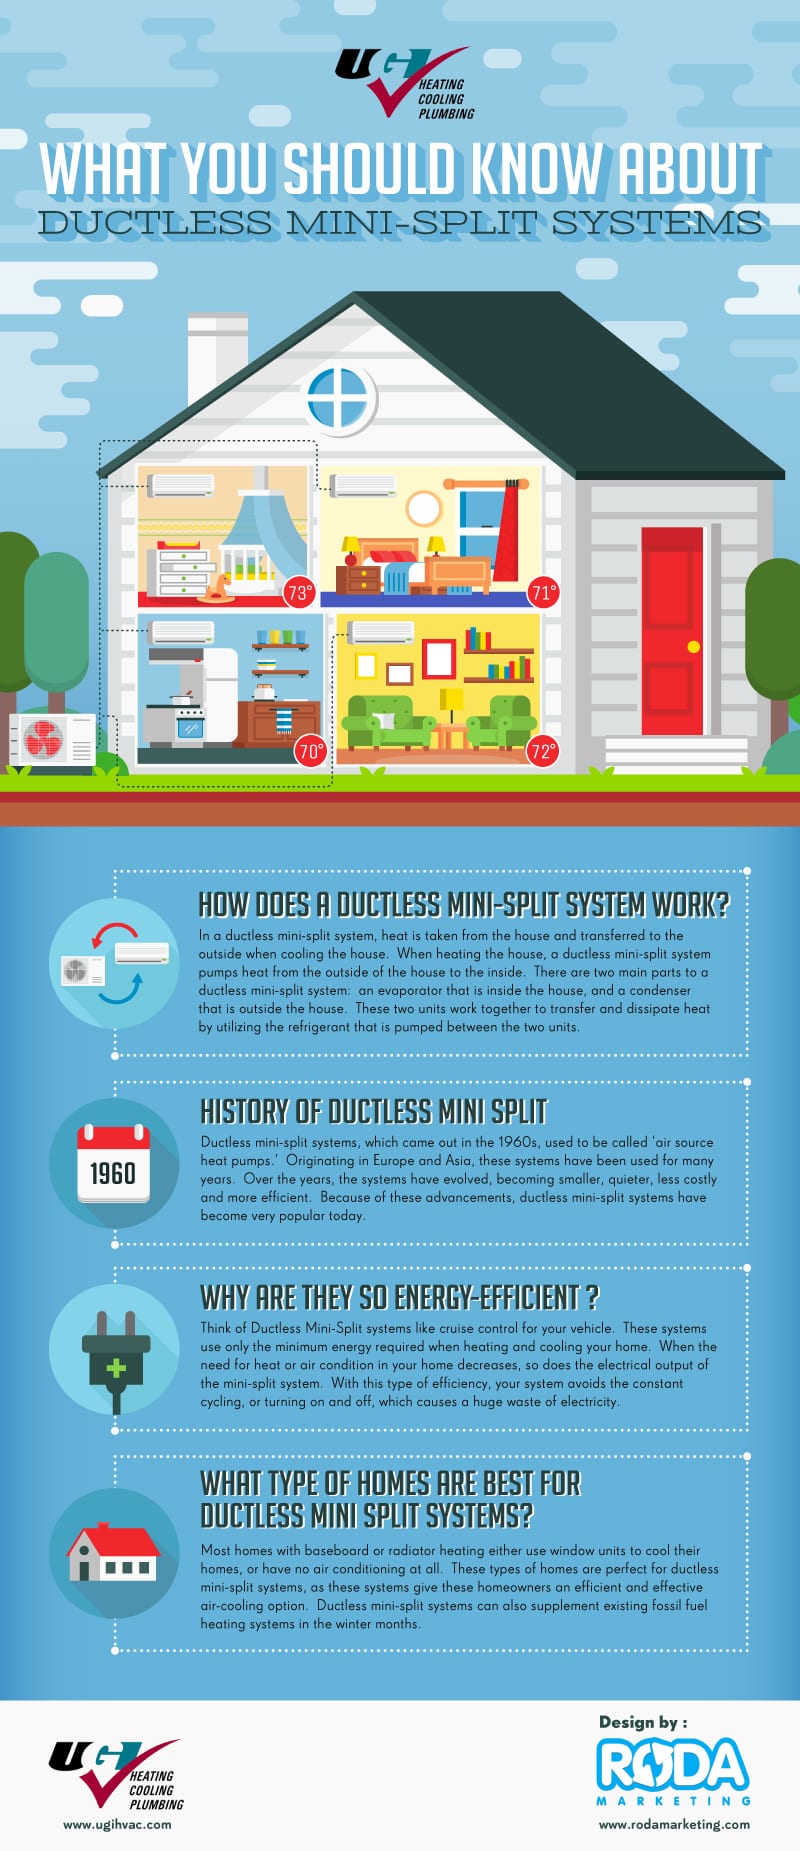 Infographic describing what you should know about ductless mini-split systems